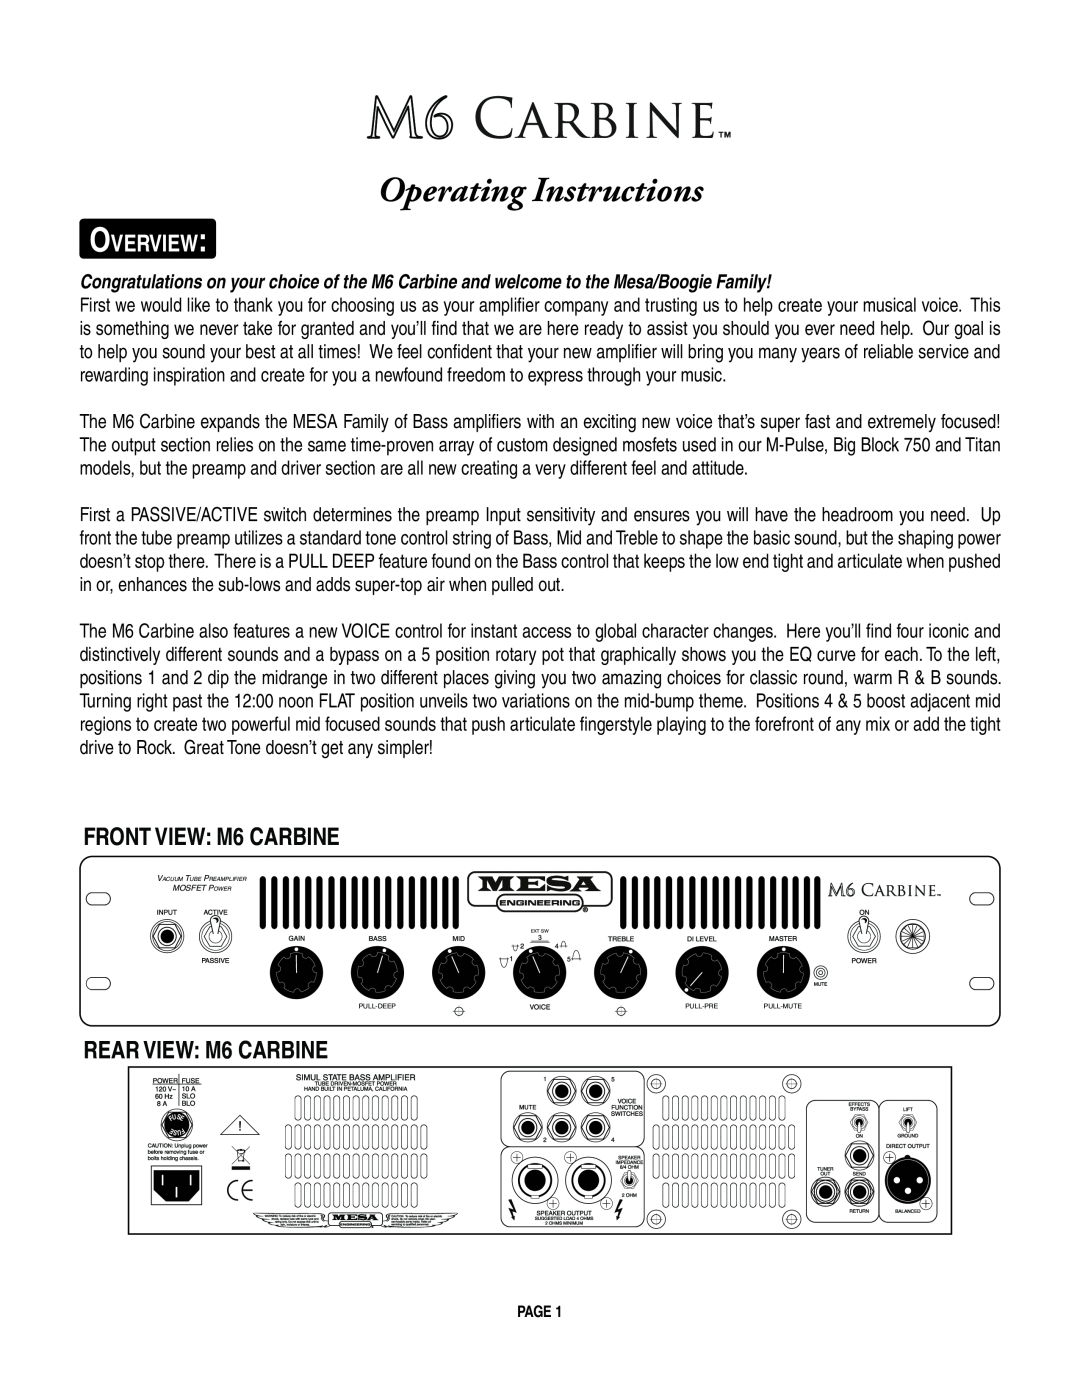 Mesa/Boogie owner manual Operating Instructions, Overview, FRONT VIEW M6 CARBINE, REAR VIEW M6 CARBINE 